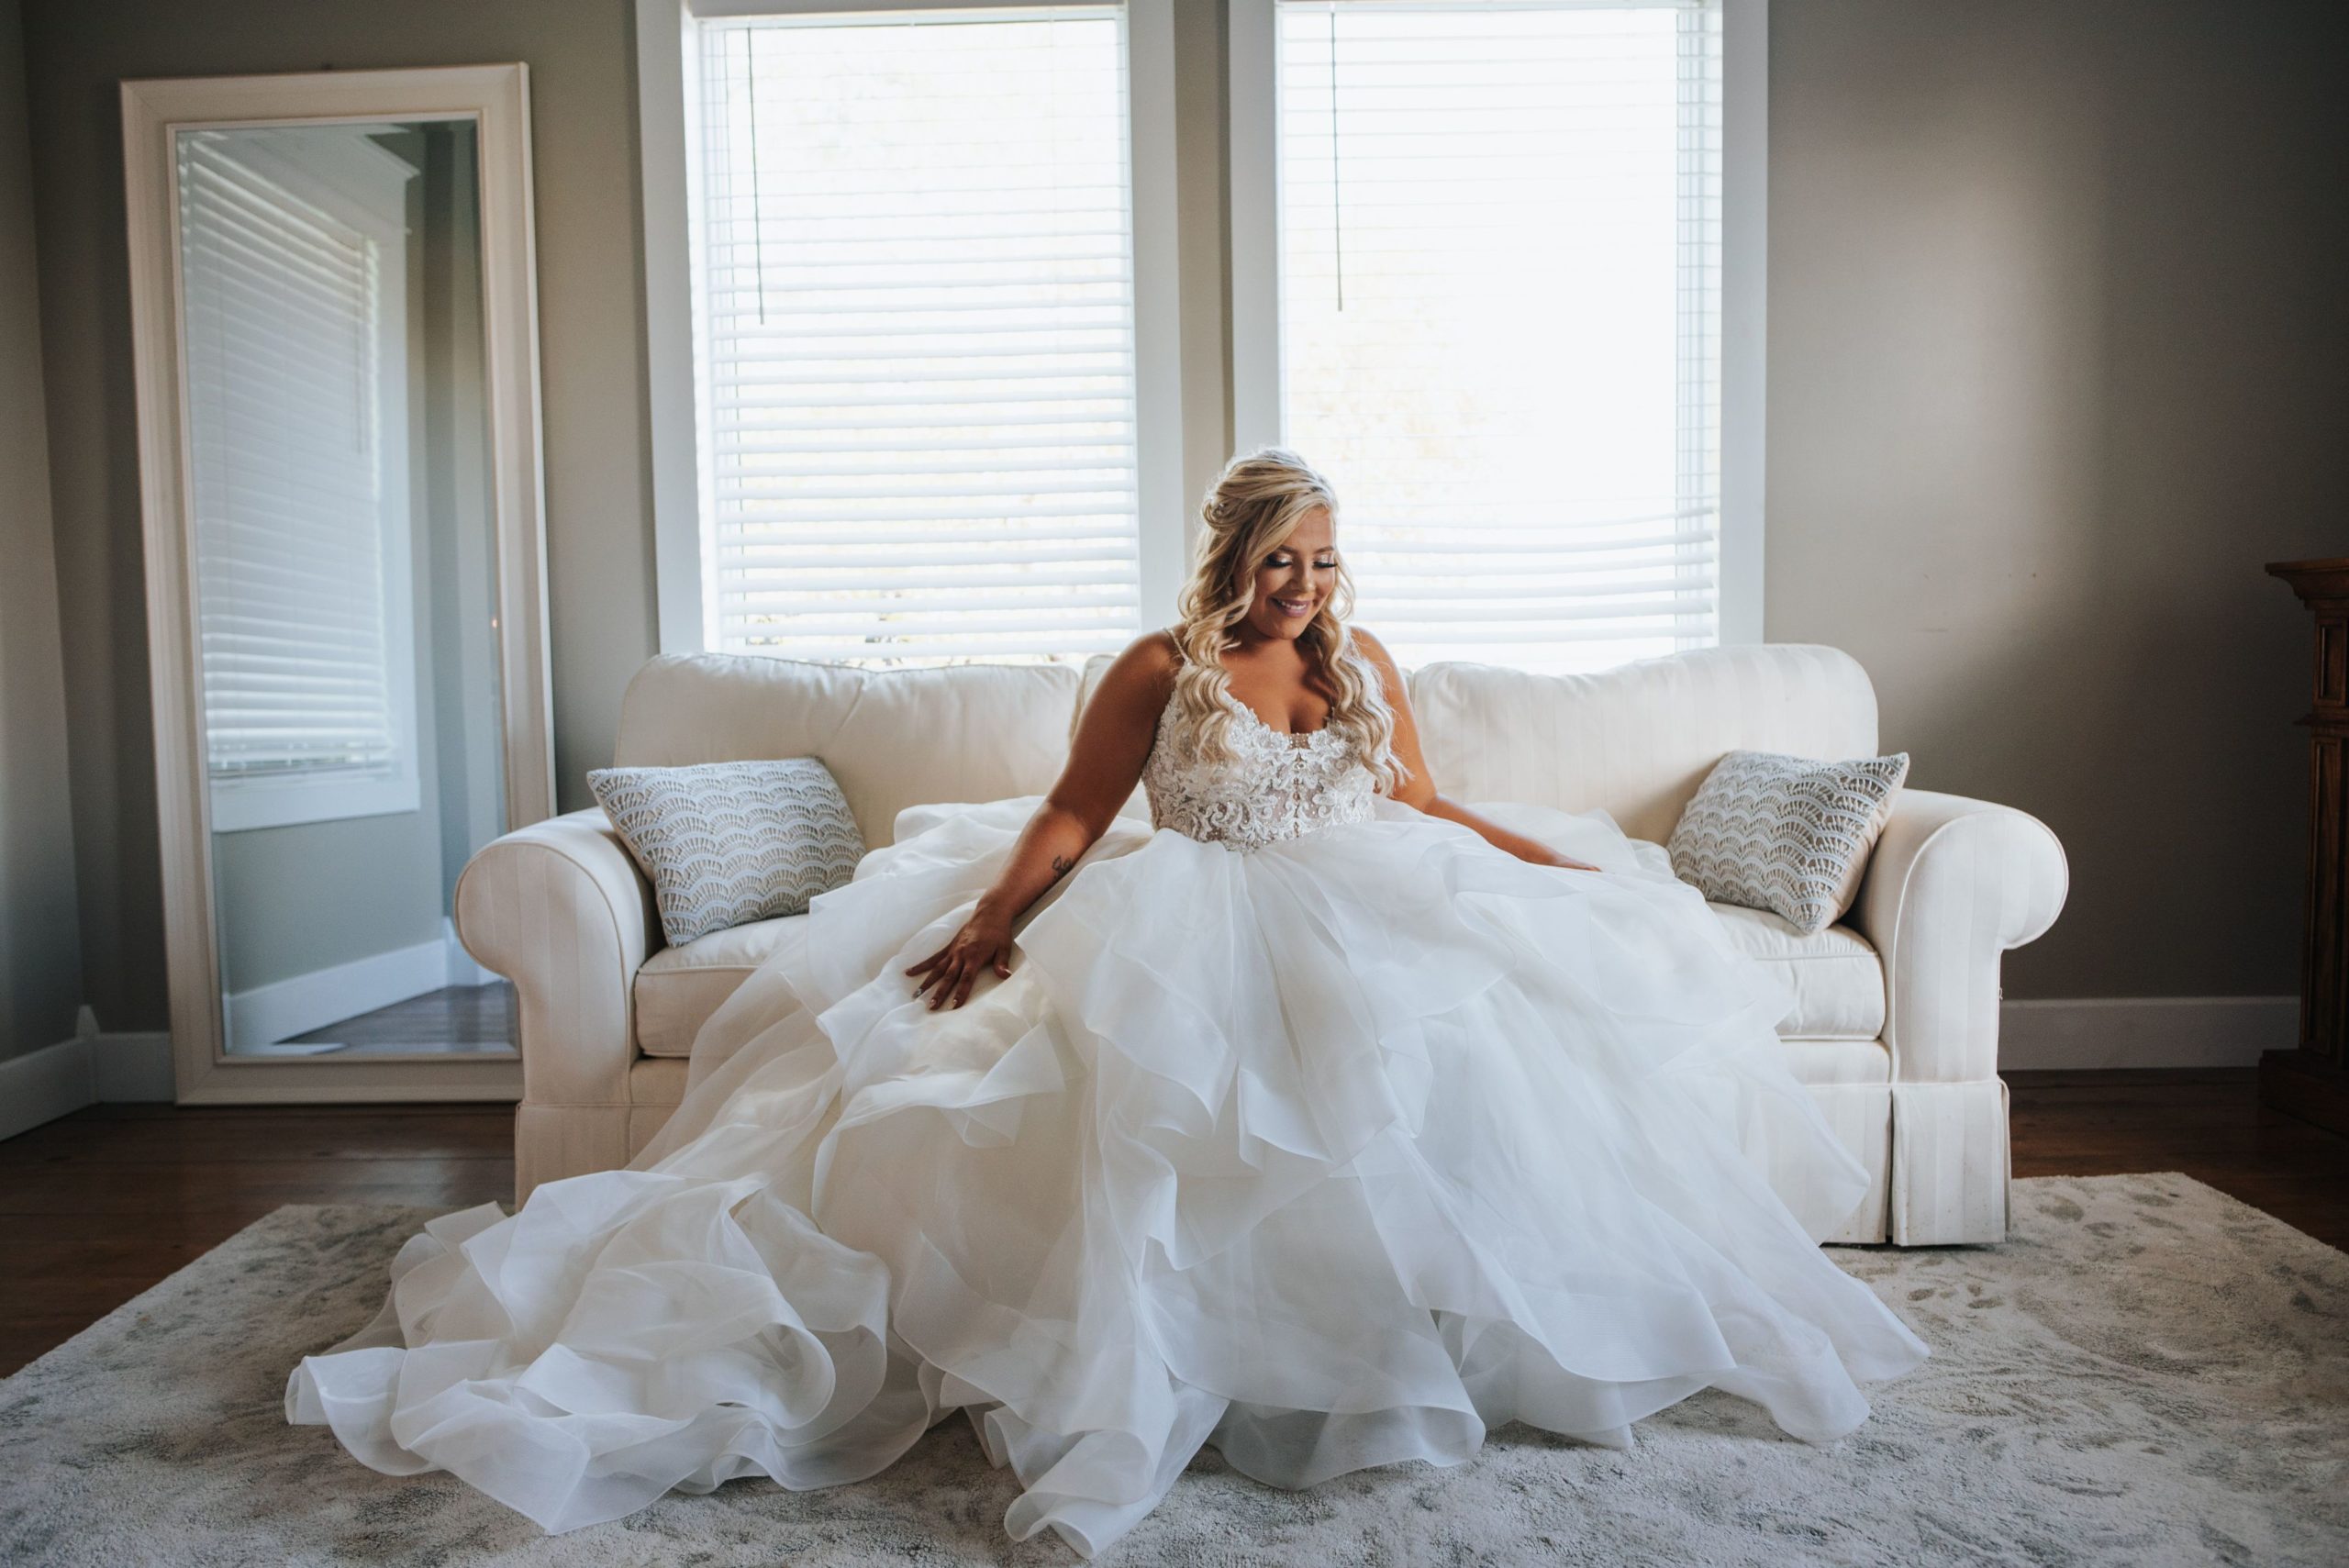 Top 5 Poses for Brides